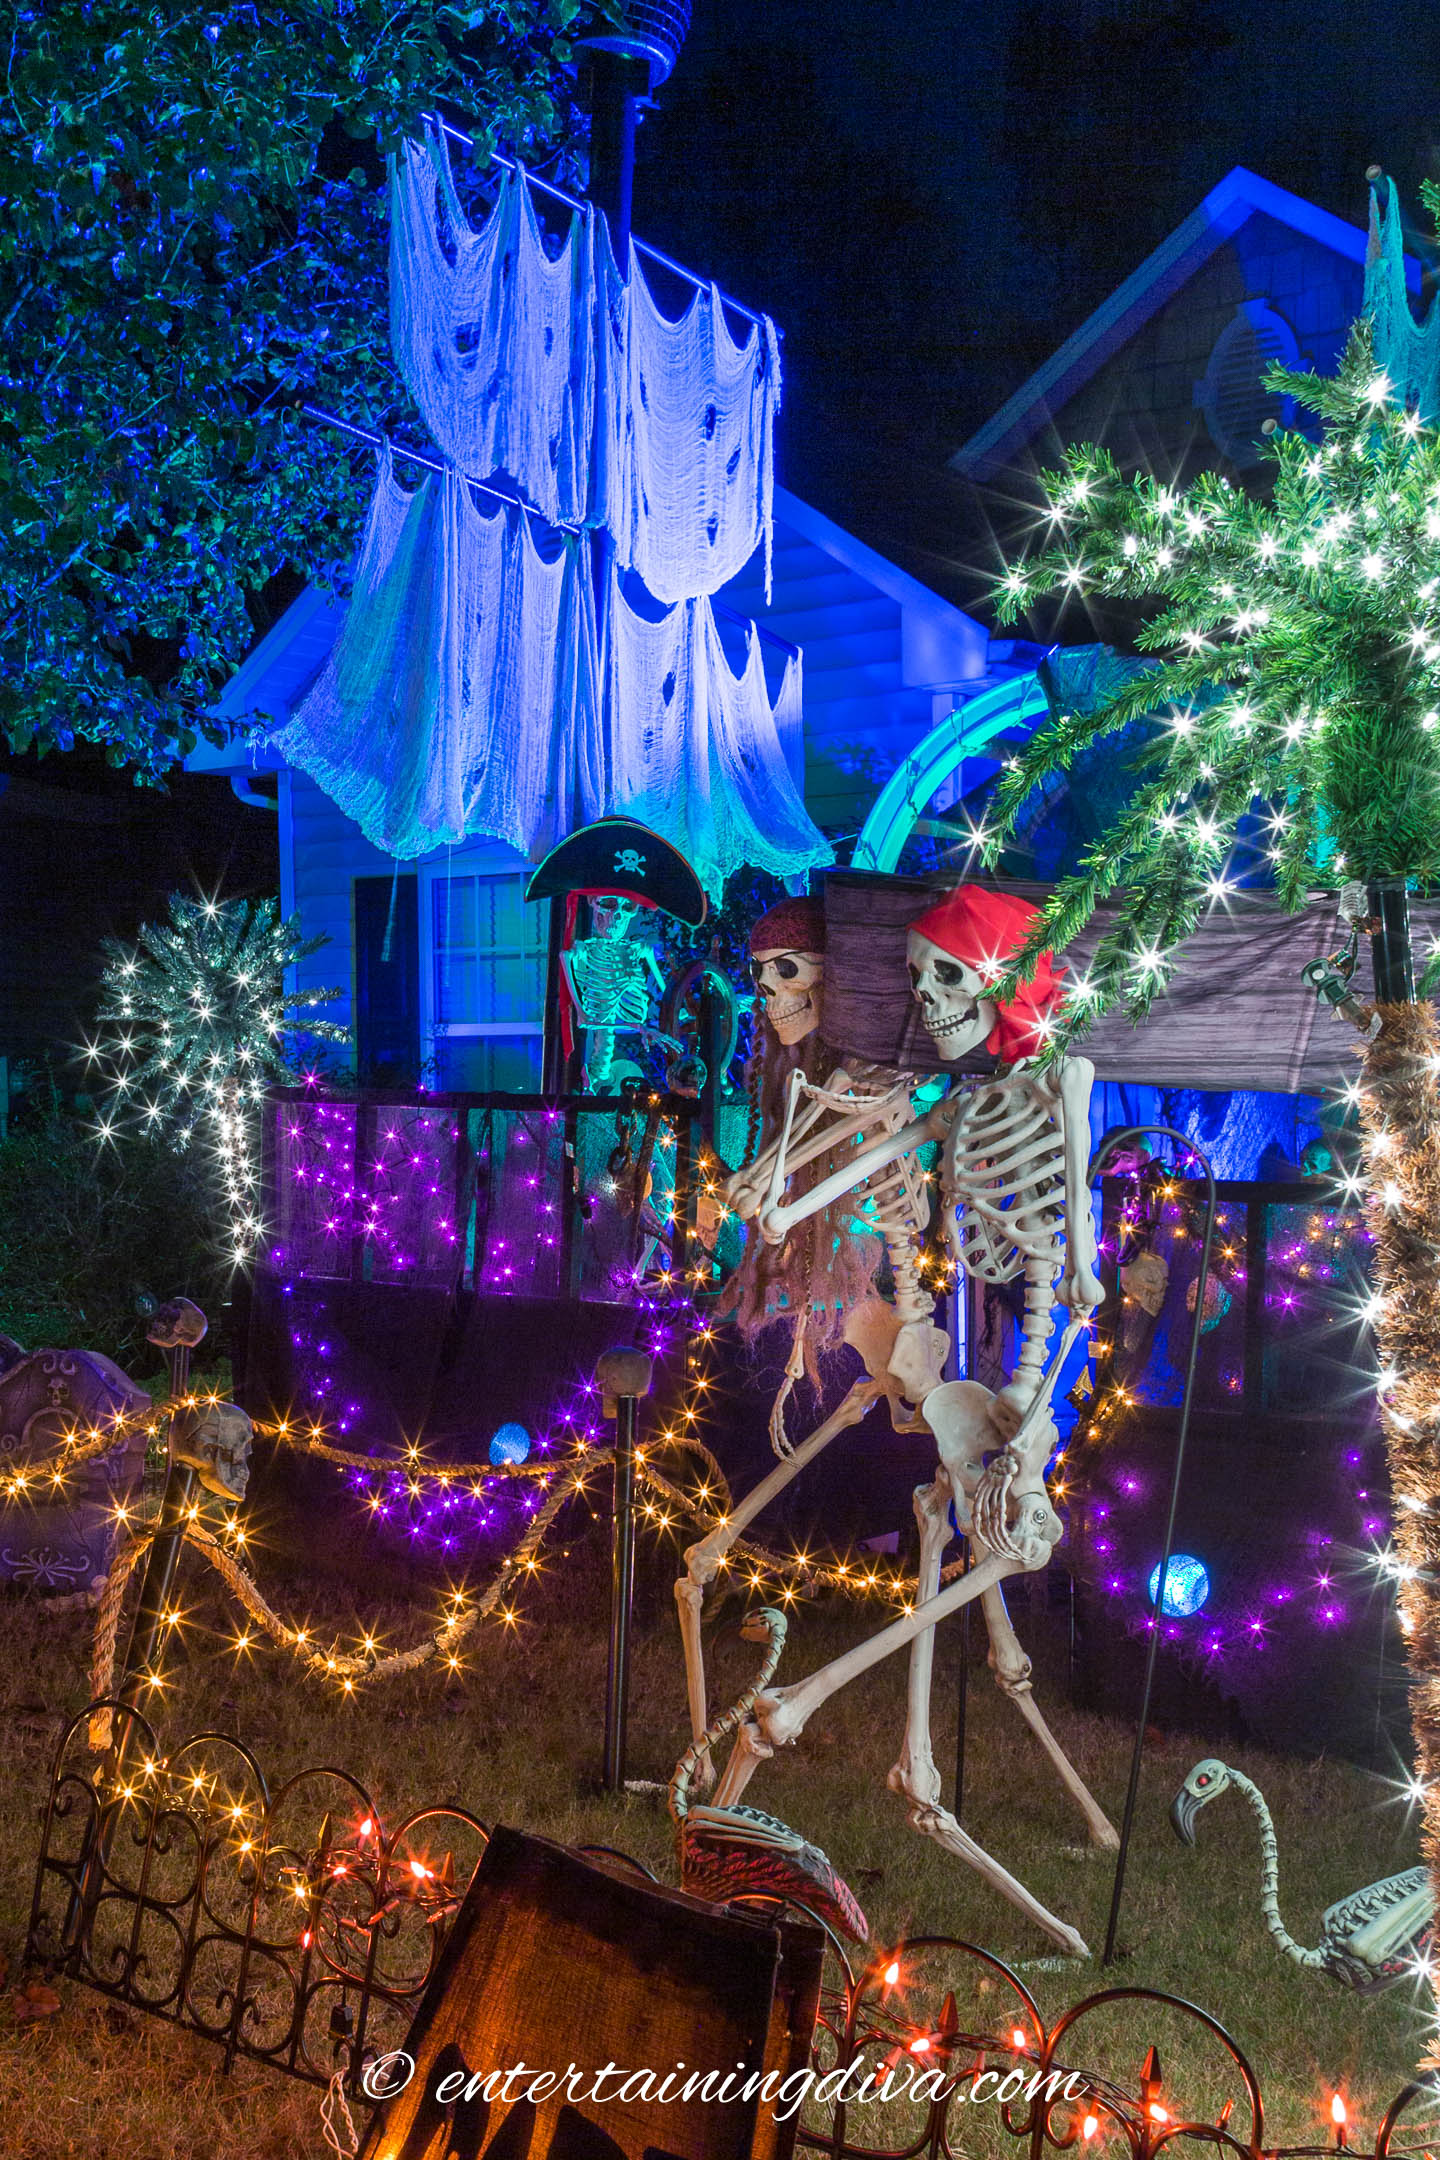 Pirates of the Caribbean outdoor Halloween decor with skeletons and a pirate ship